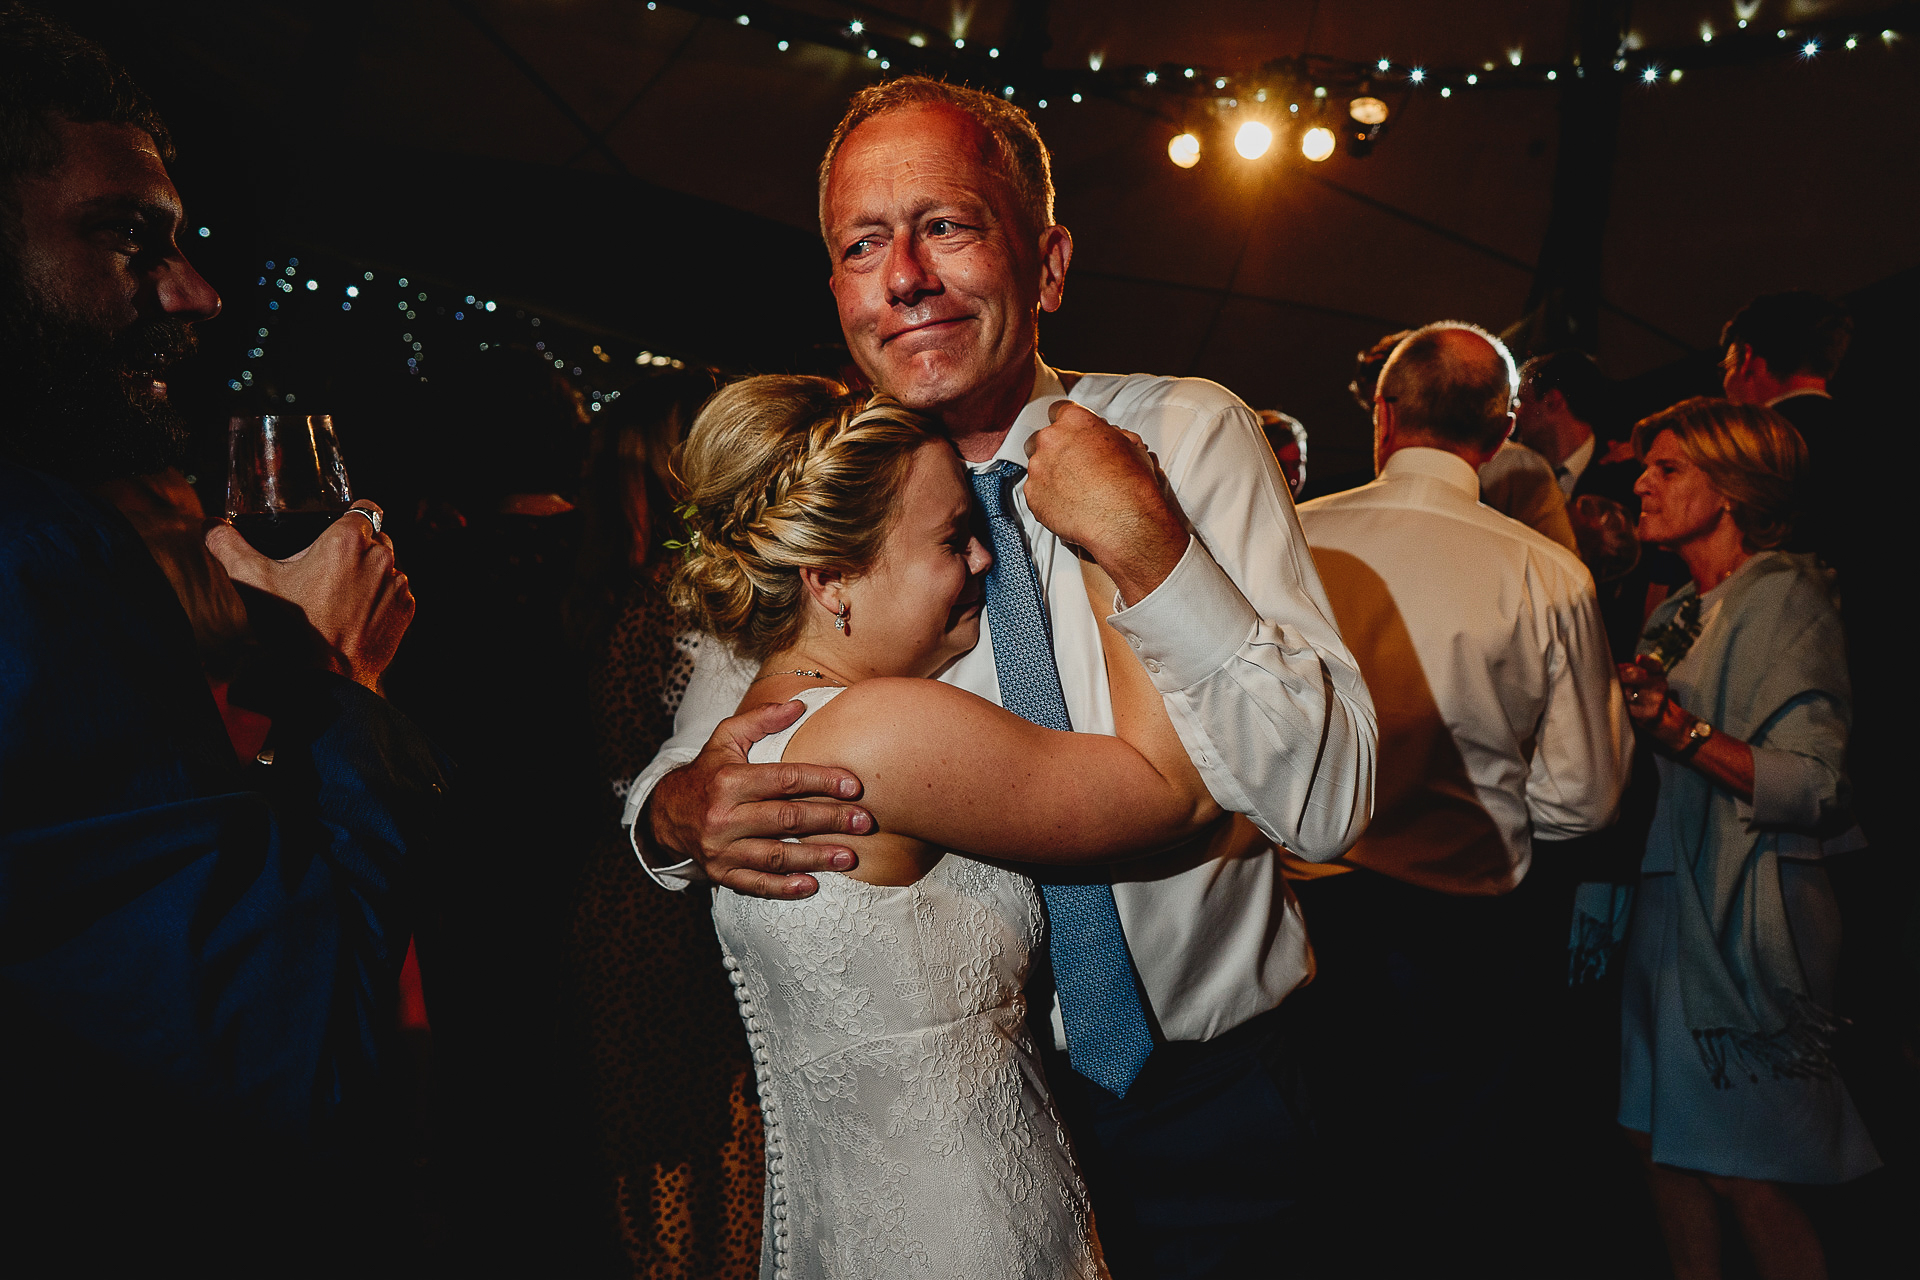 Bride and her father dancing together